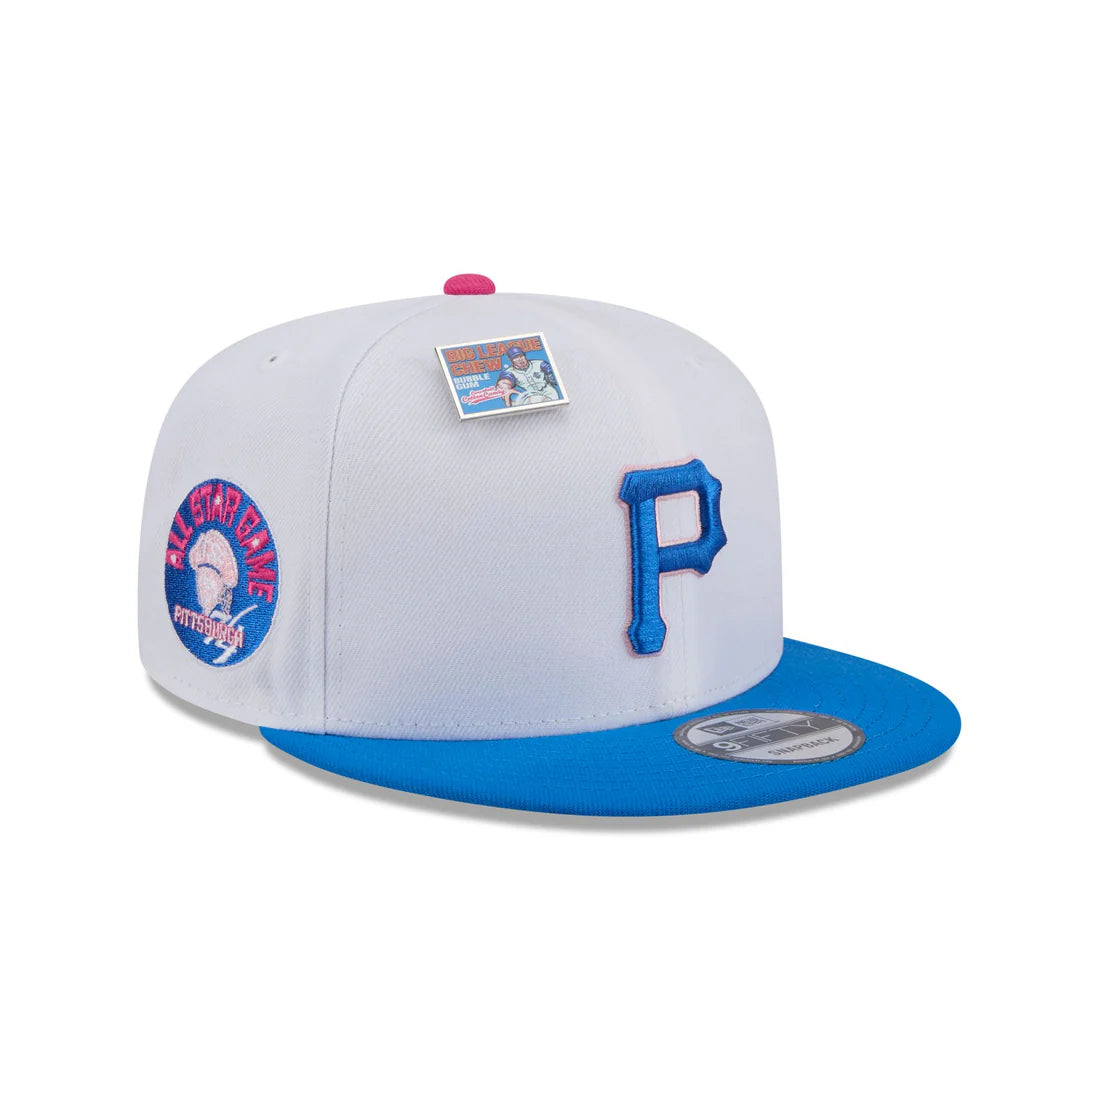 New Era Pittsburgh Pirates Cotton Candy Big League Chew Flavor Pack 9FIFTY Snapback Hat-White/Blue